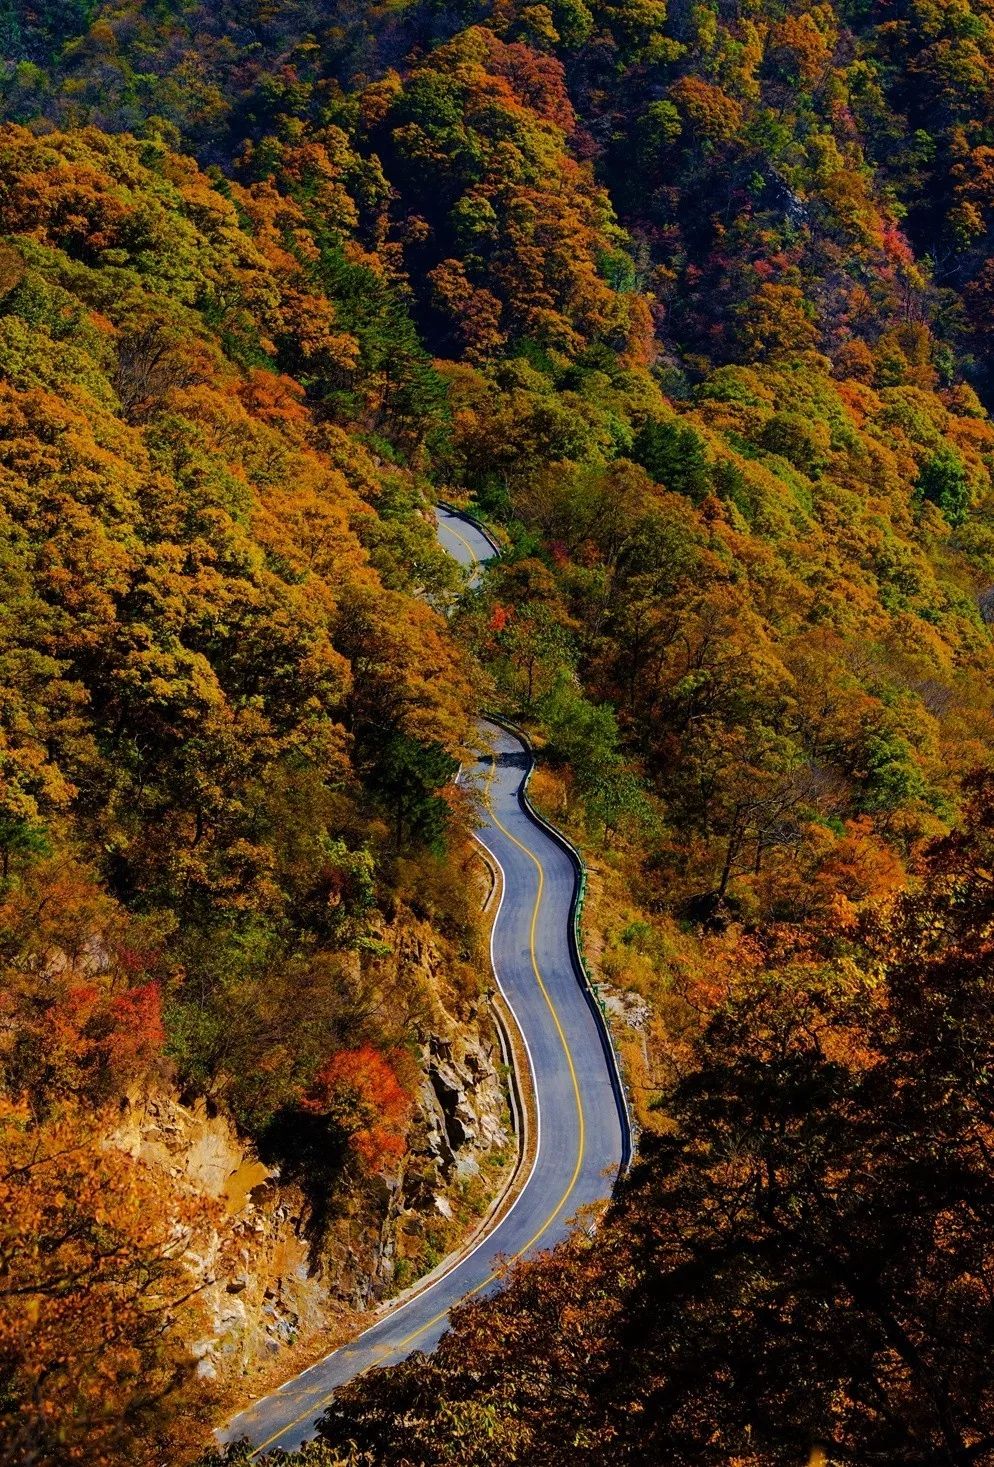 Vision丨Jinzhai Martin Highway is so beautiful! With specific lines!